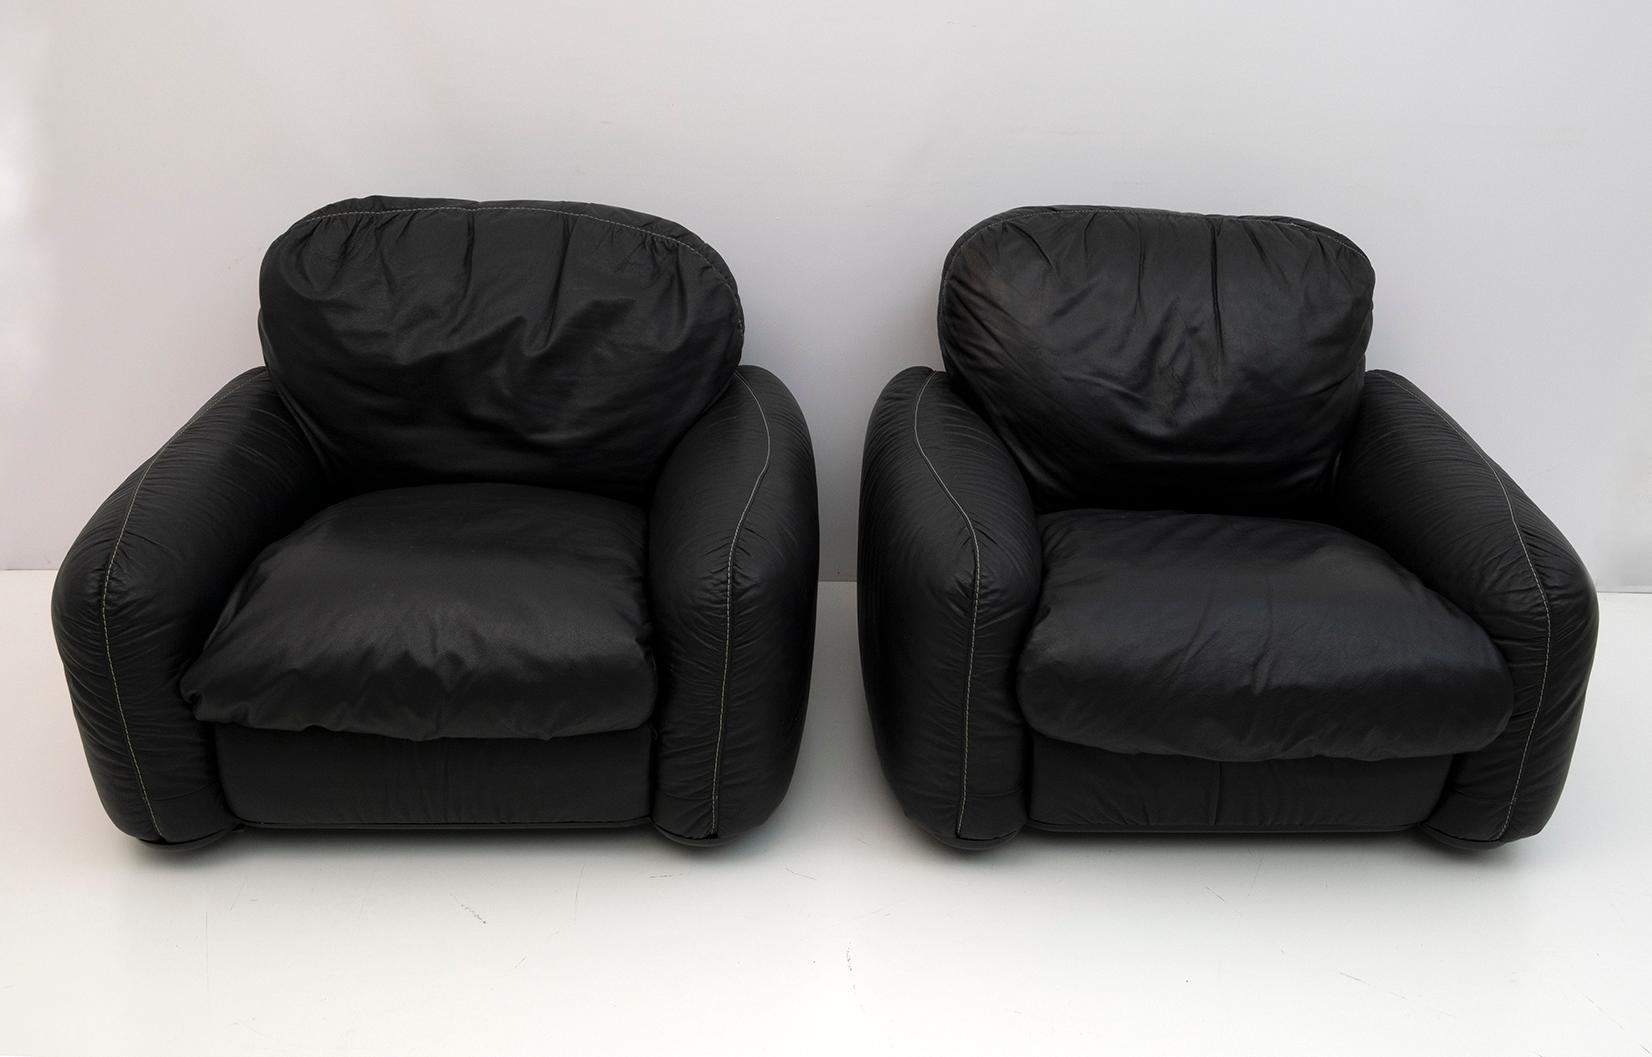 Pair of Piumotto armchairs by Arrigo Arrigoni for Busnelli from the 1970s.
Upholstery in genuine black leather.
Feet in plastic.